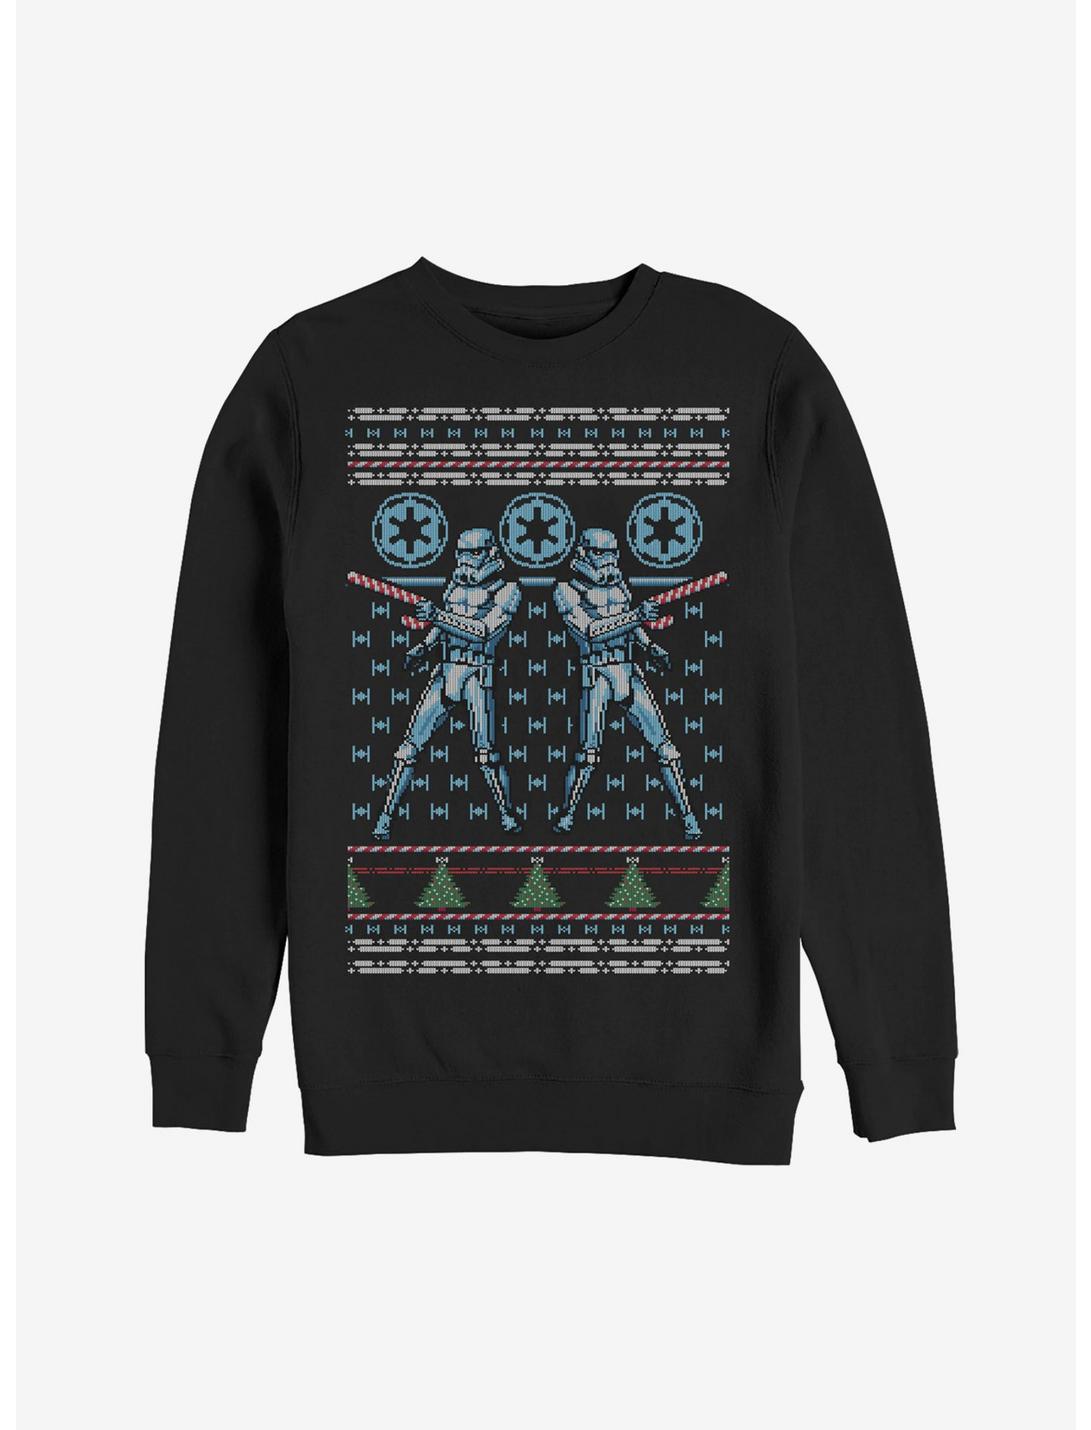 Plus Size Star Wars Ugly Christmas Sweater Candy Stormtrooper Sweatshirt, BLACK, hi-res